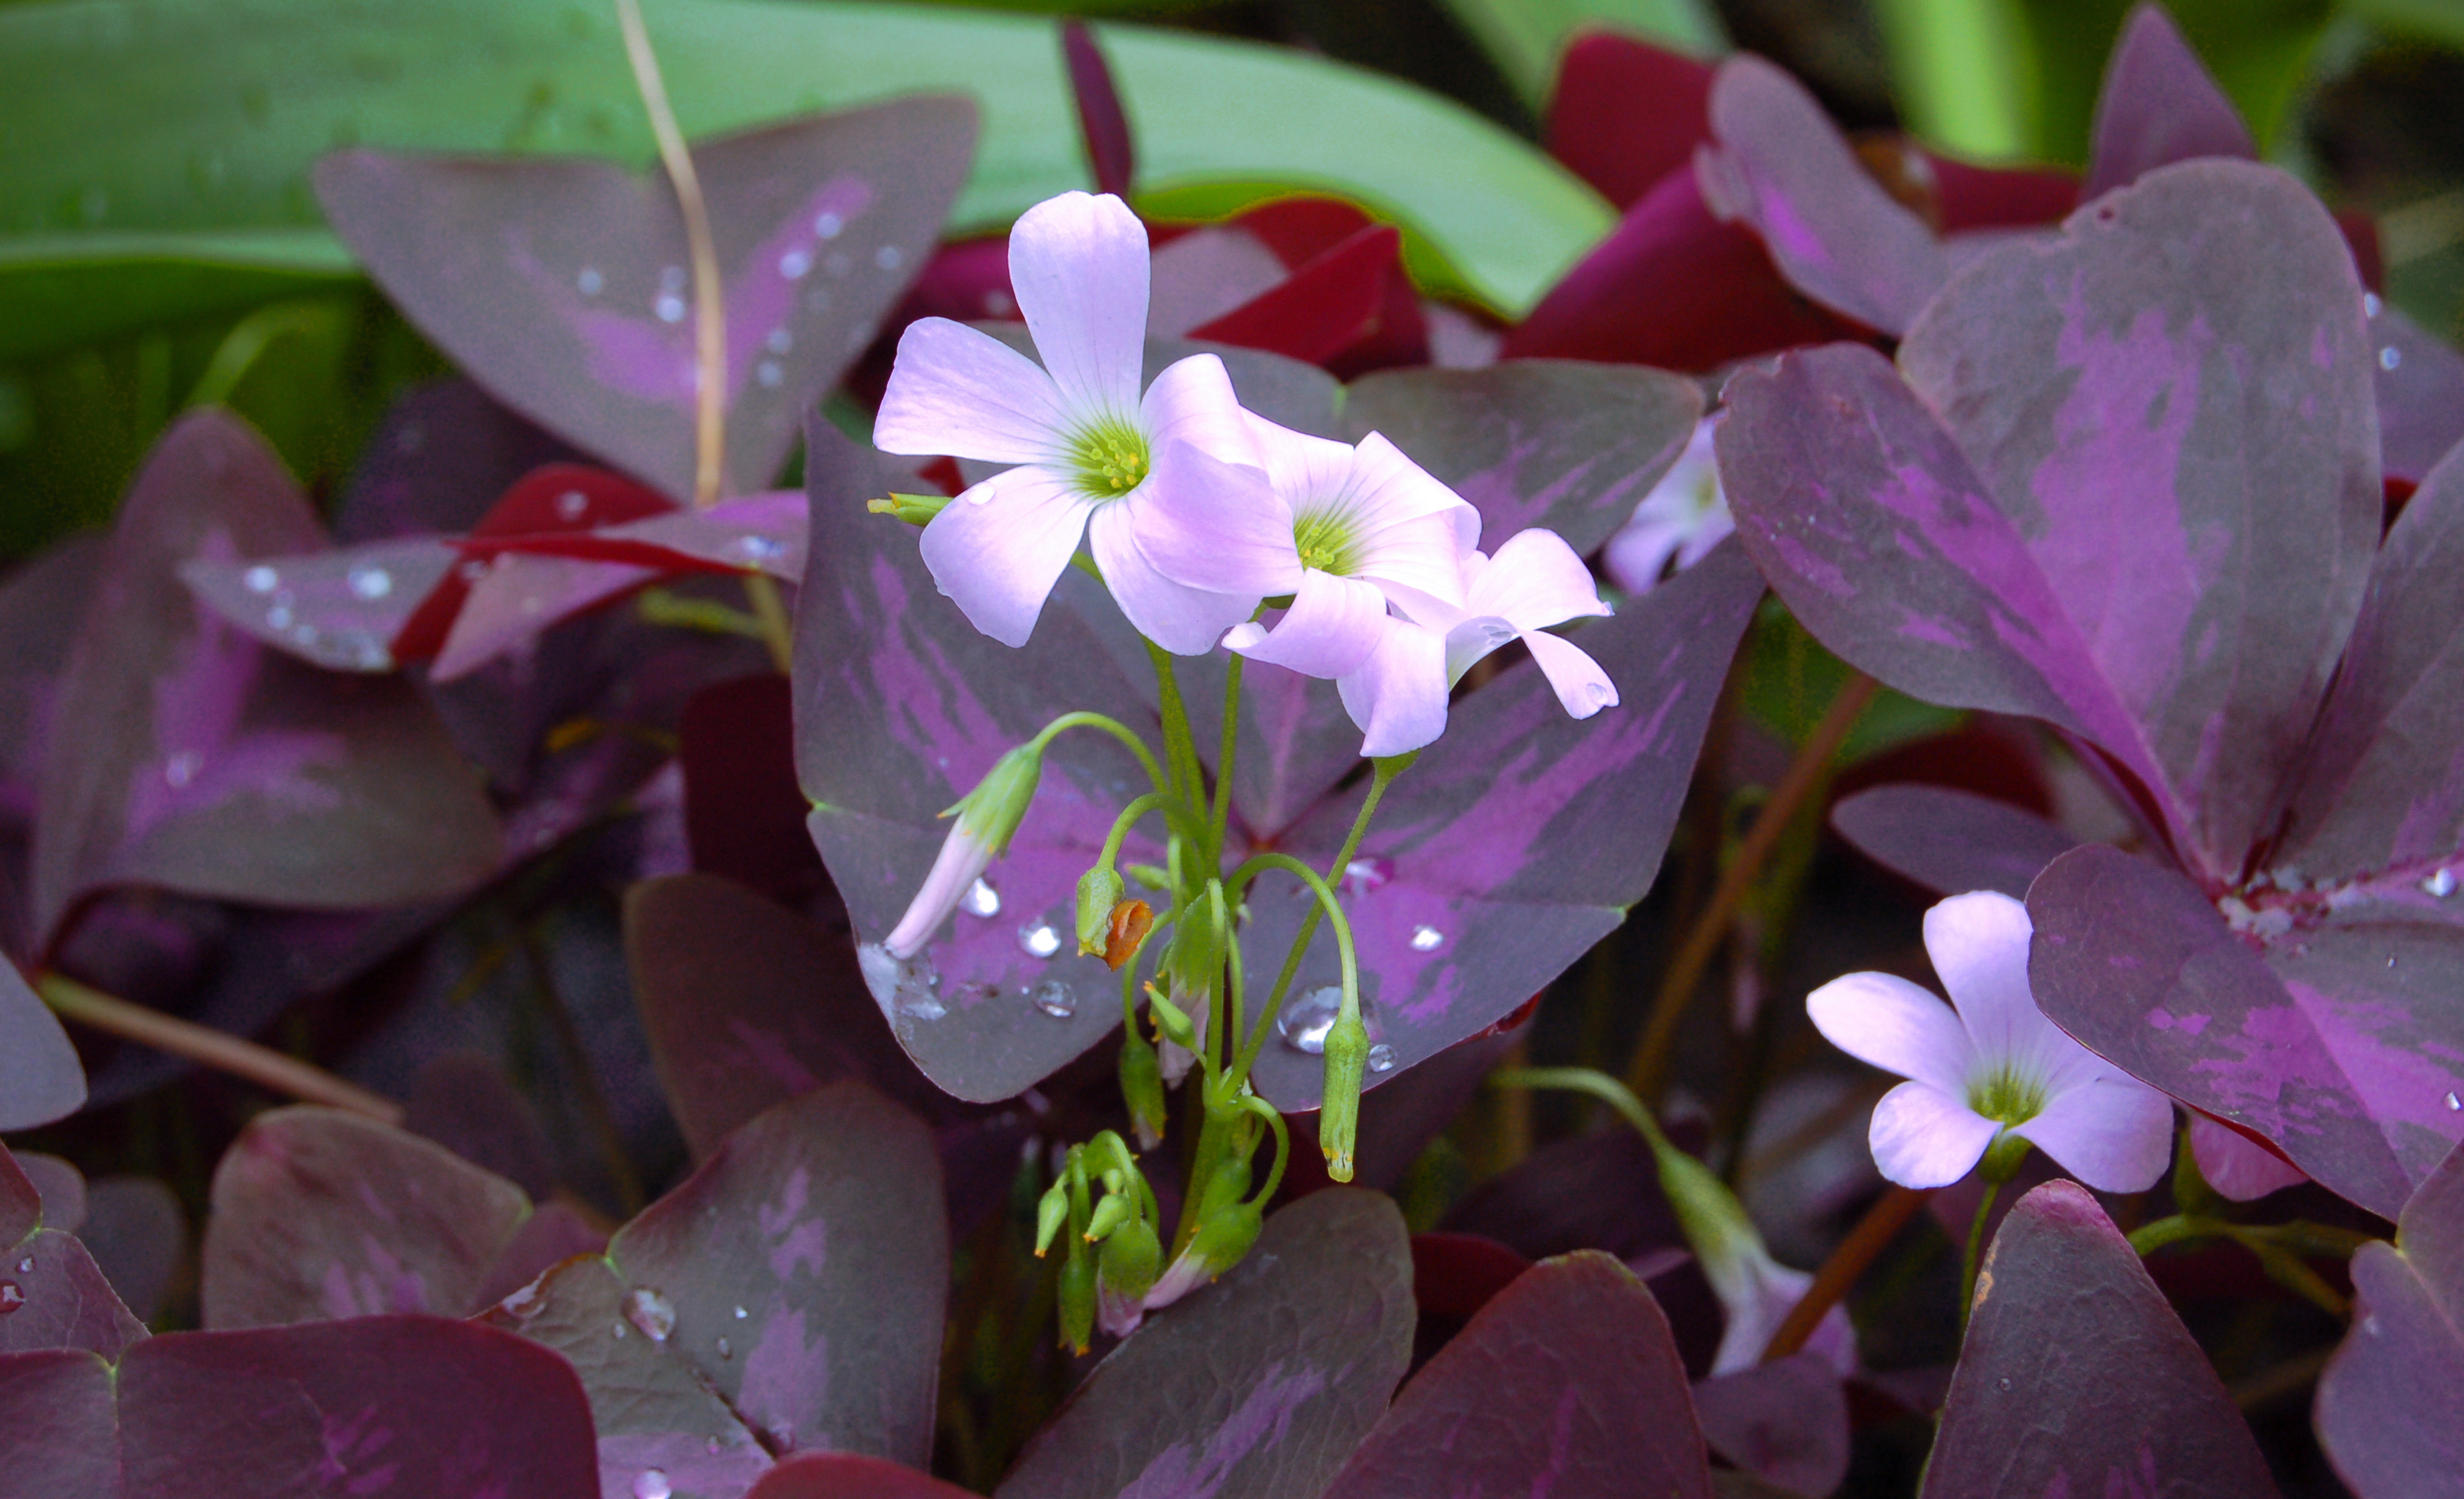 Growing oxalis indoors and out | Garden Making